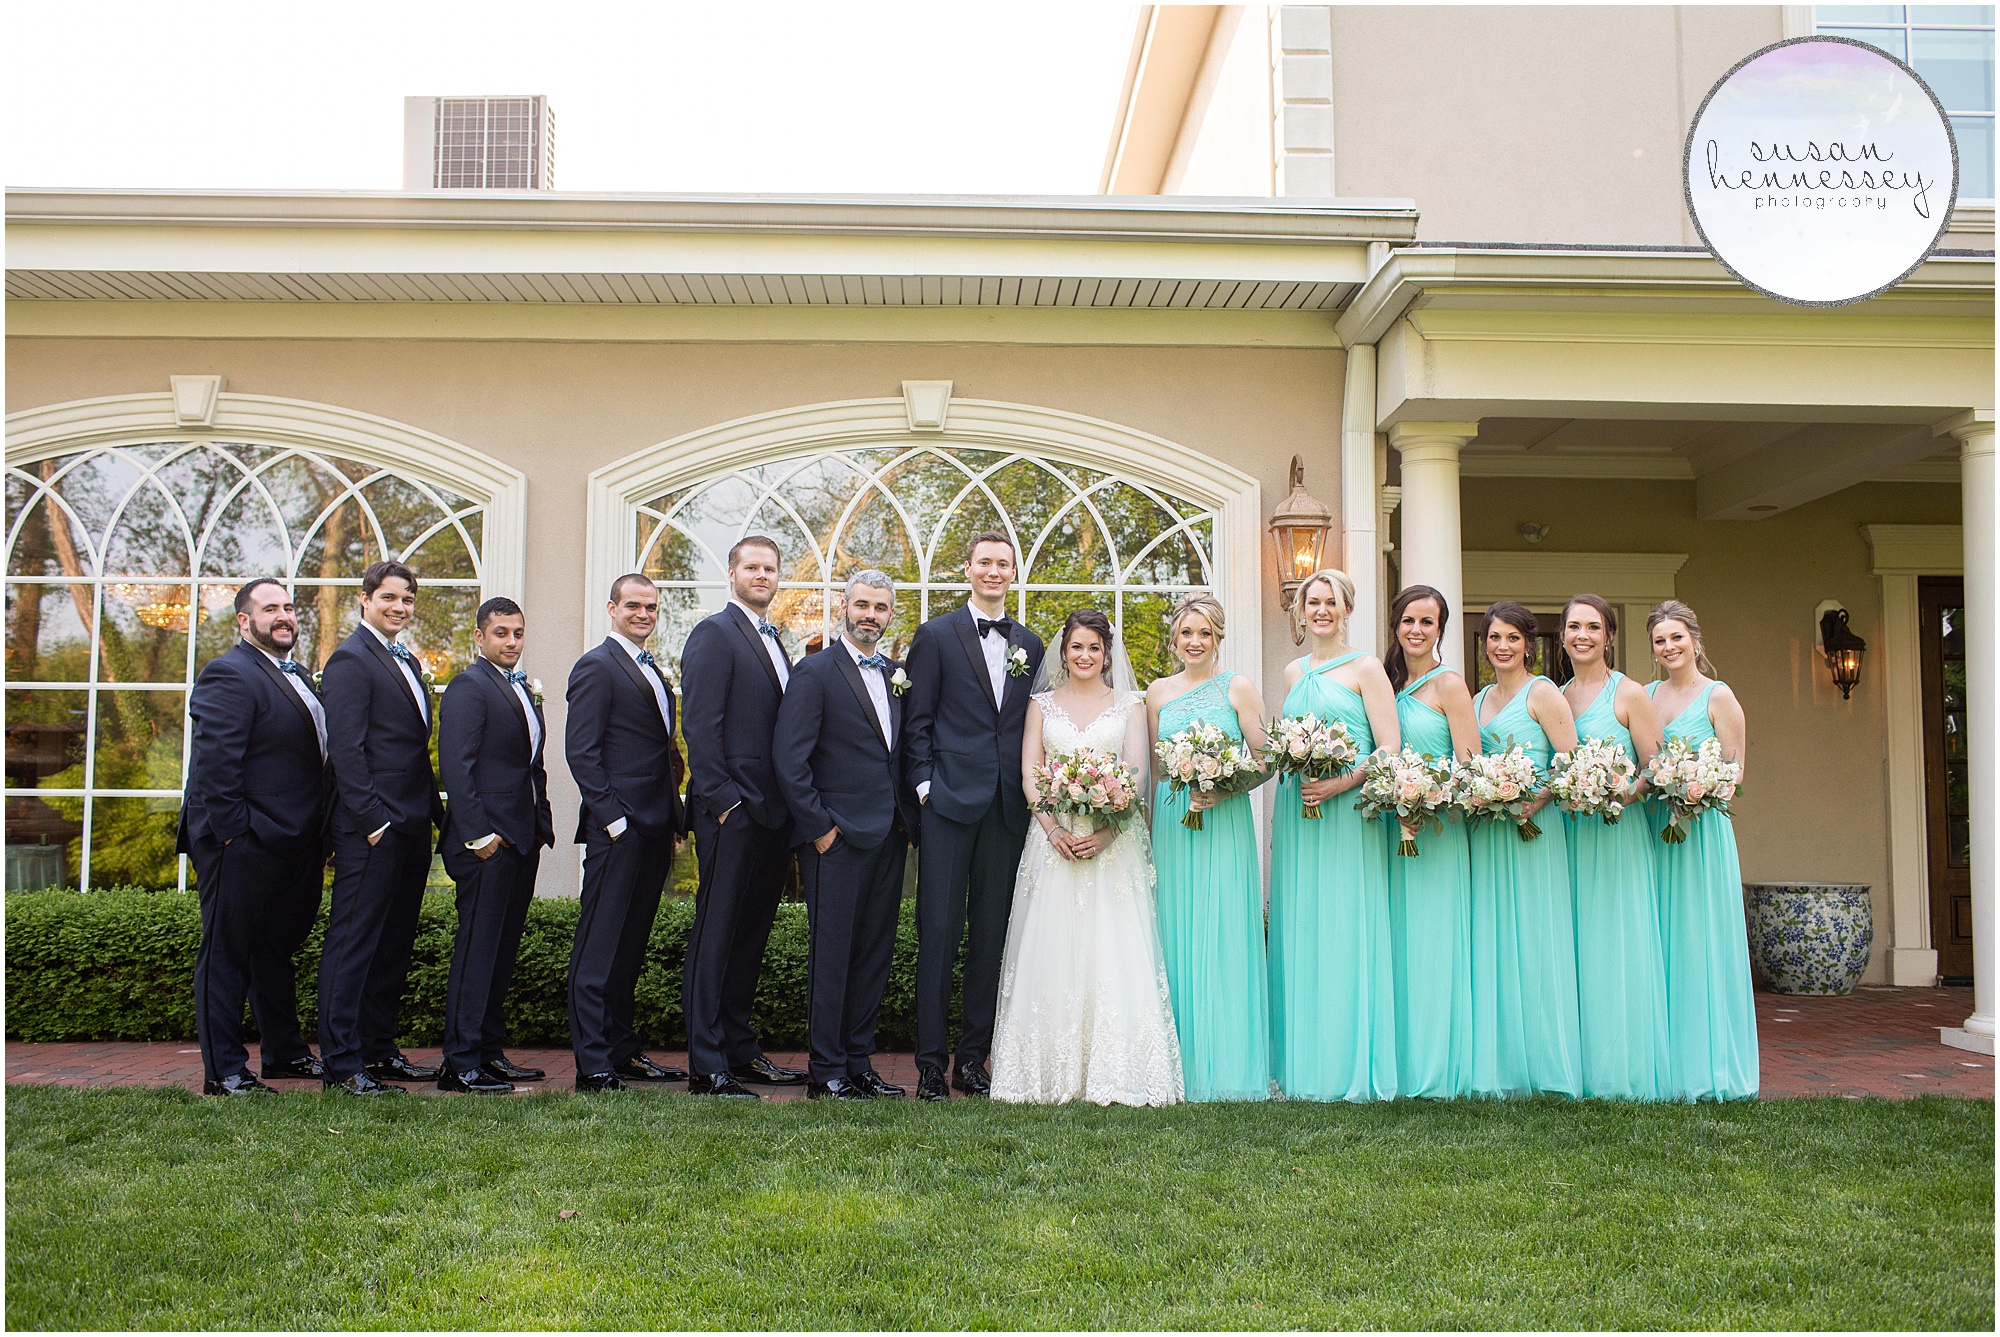 Bridal Party in mint and navy at wedding venue in Hainesport, NJ